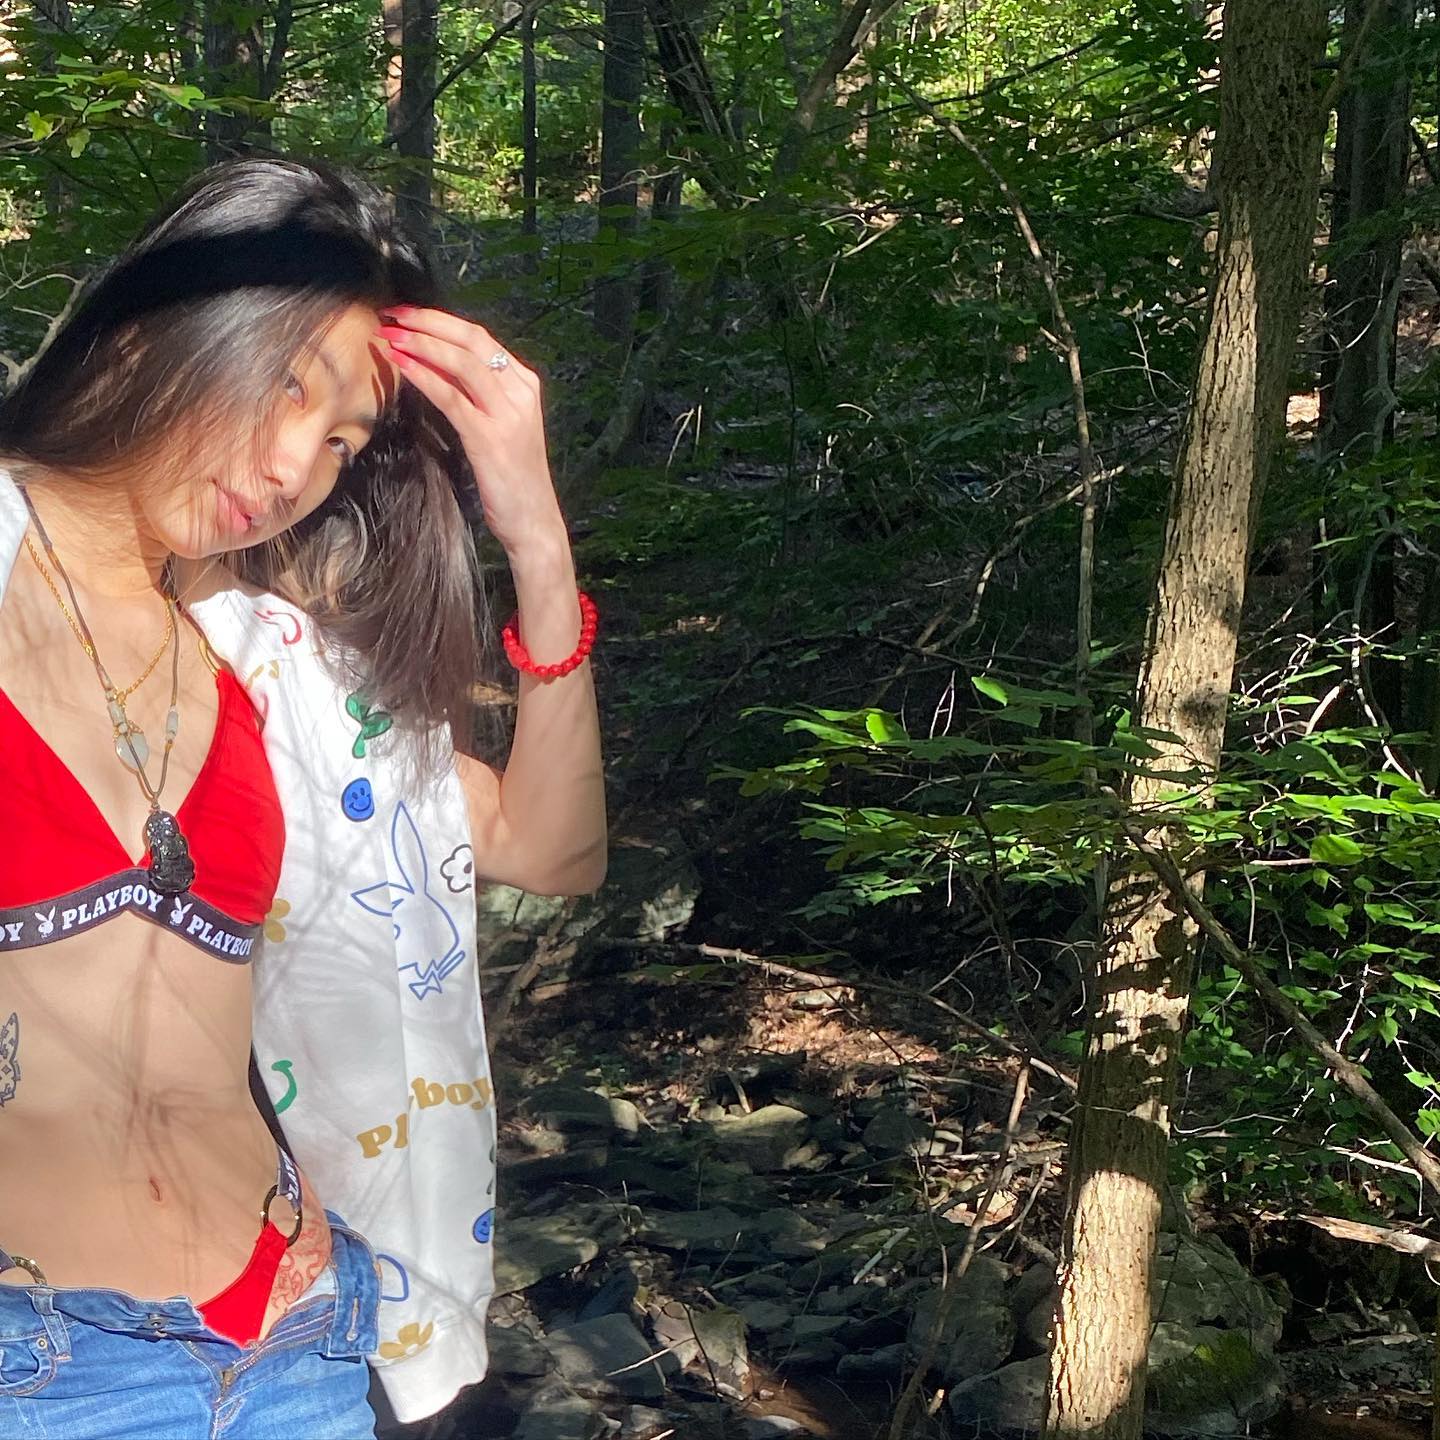 Nature enjoying me 🤭
-
-
-
This is my application for @playboy 😋
-
-
-
#forestpictures #almostfellgettinghere #perfectsunlight #playboymodel #playboybunny #playboyclub #explorepage #asiangirls #iphonepicsonly #realnaturephoto